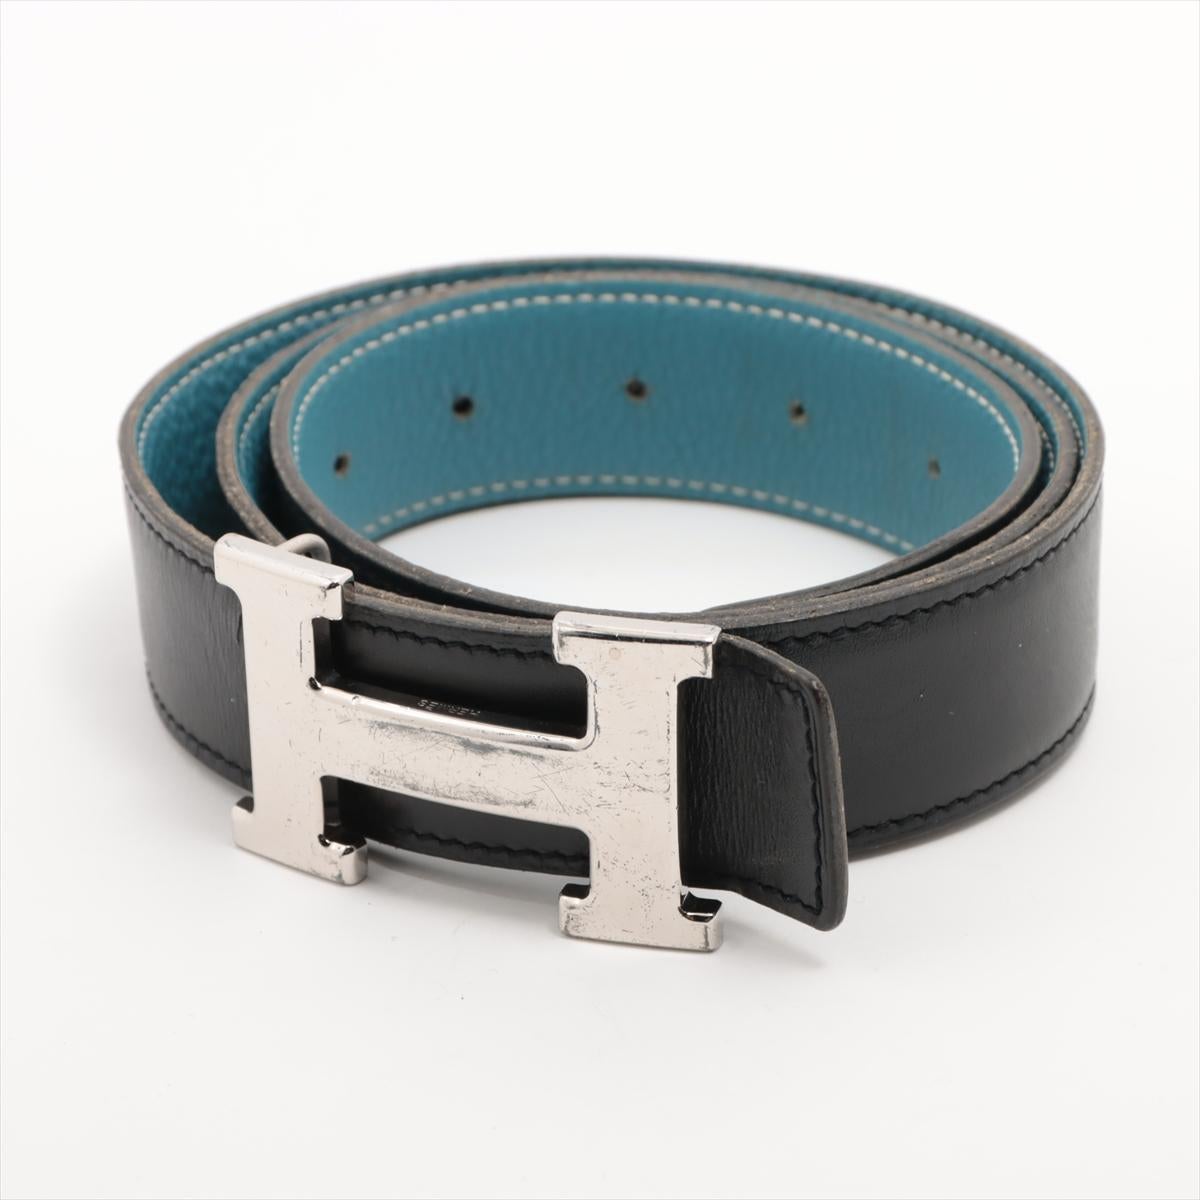 The Hermès H Reversible Belt in Black x Blue is a versatile and luxurious accessory that offers effortless style. Crafted from premium leather, this belt features the iconic 'H' buckle in polished palladium hardware, showcasing Hermès' timeless